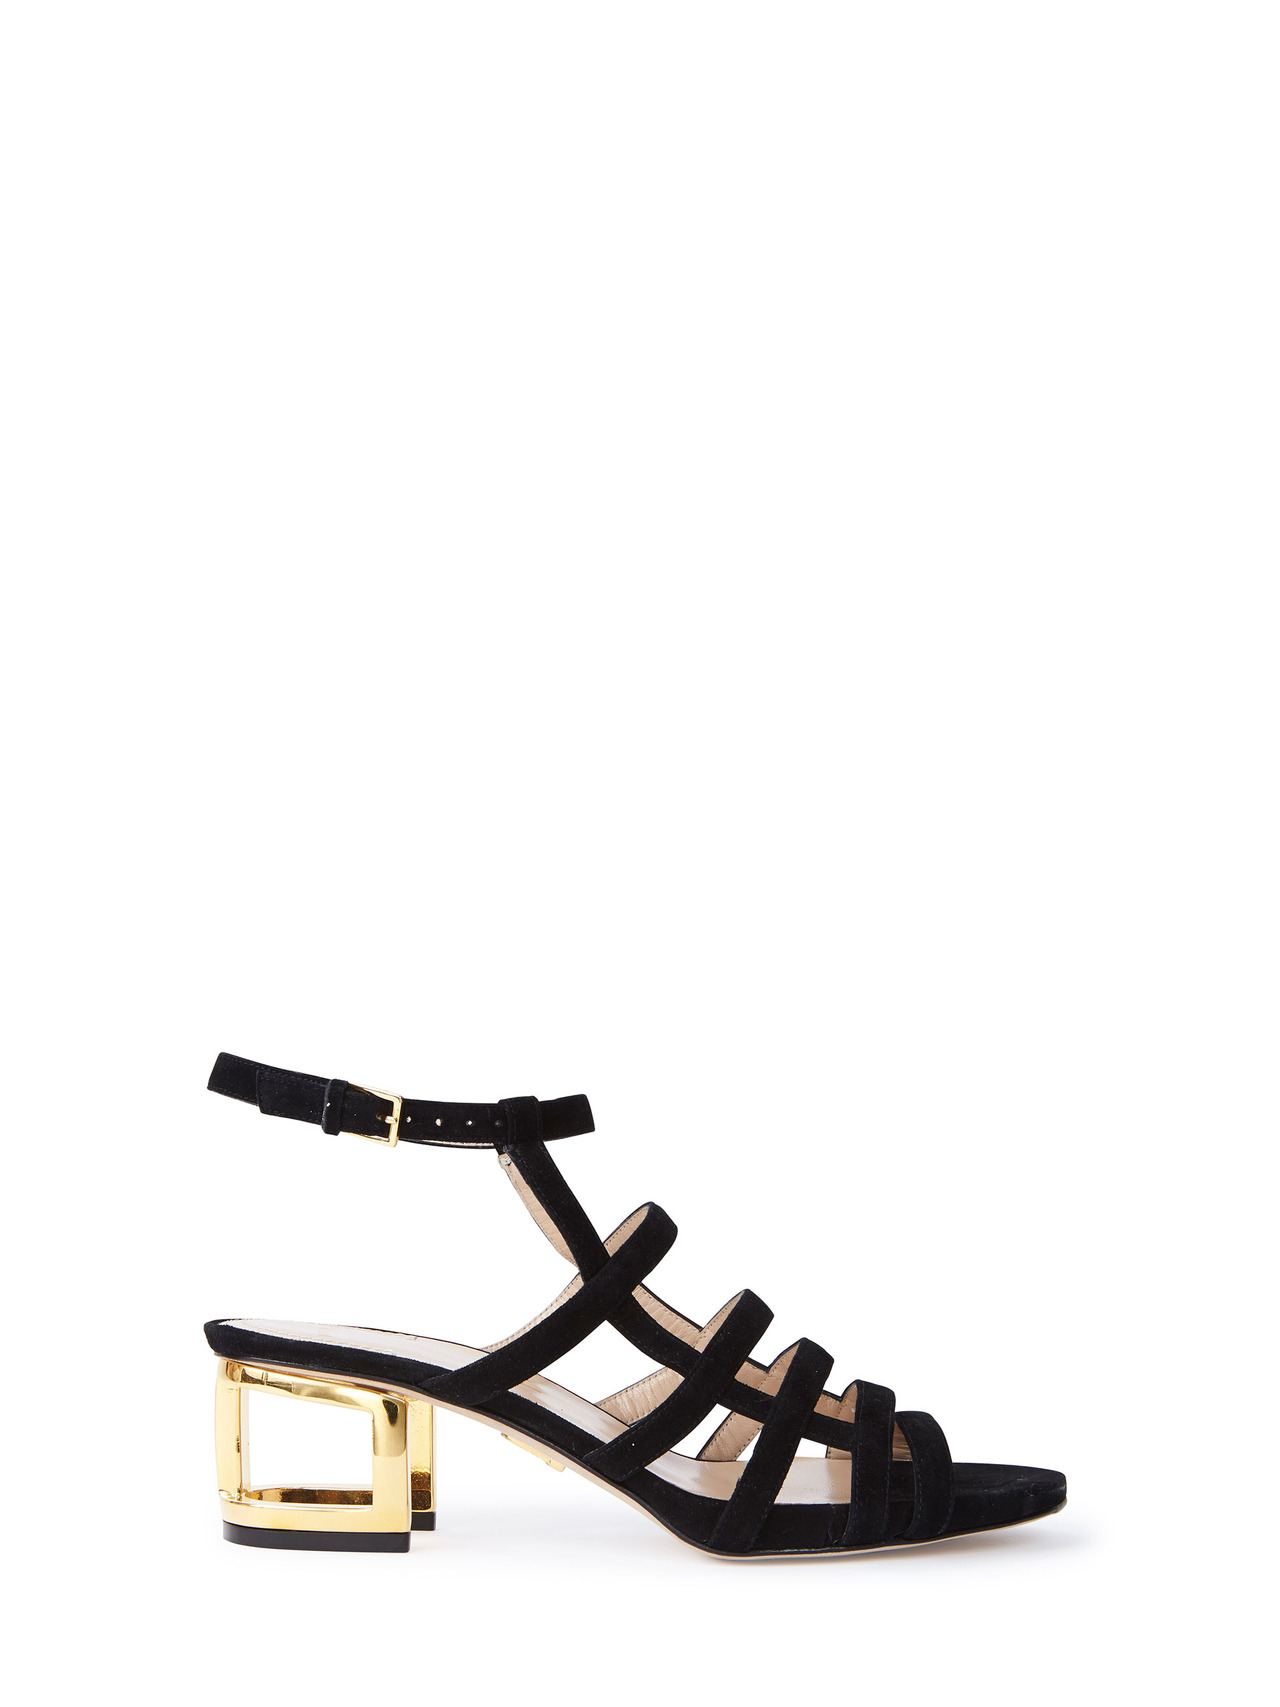 Maiyet Valencia Mid-Heel Sandals in Gold